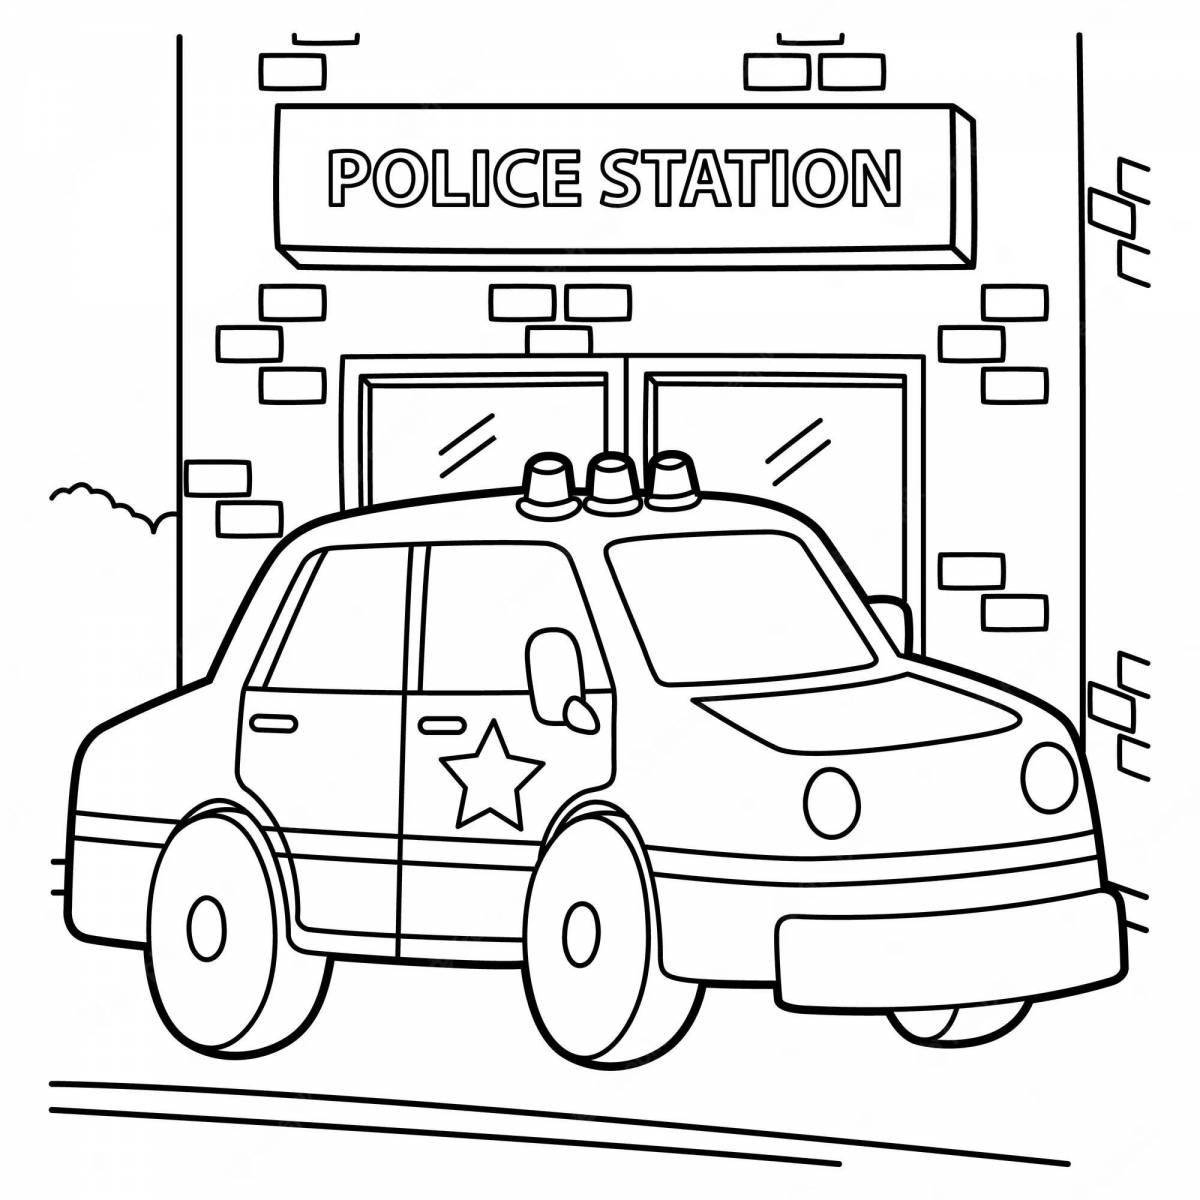 Colorful police base coloring page